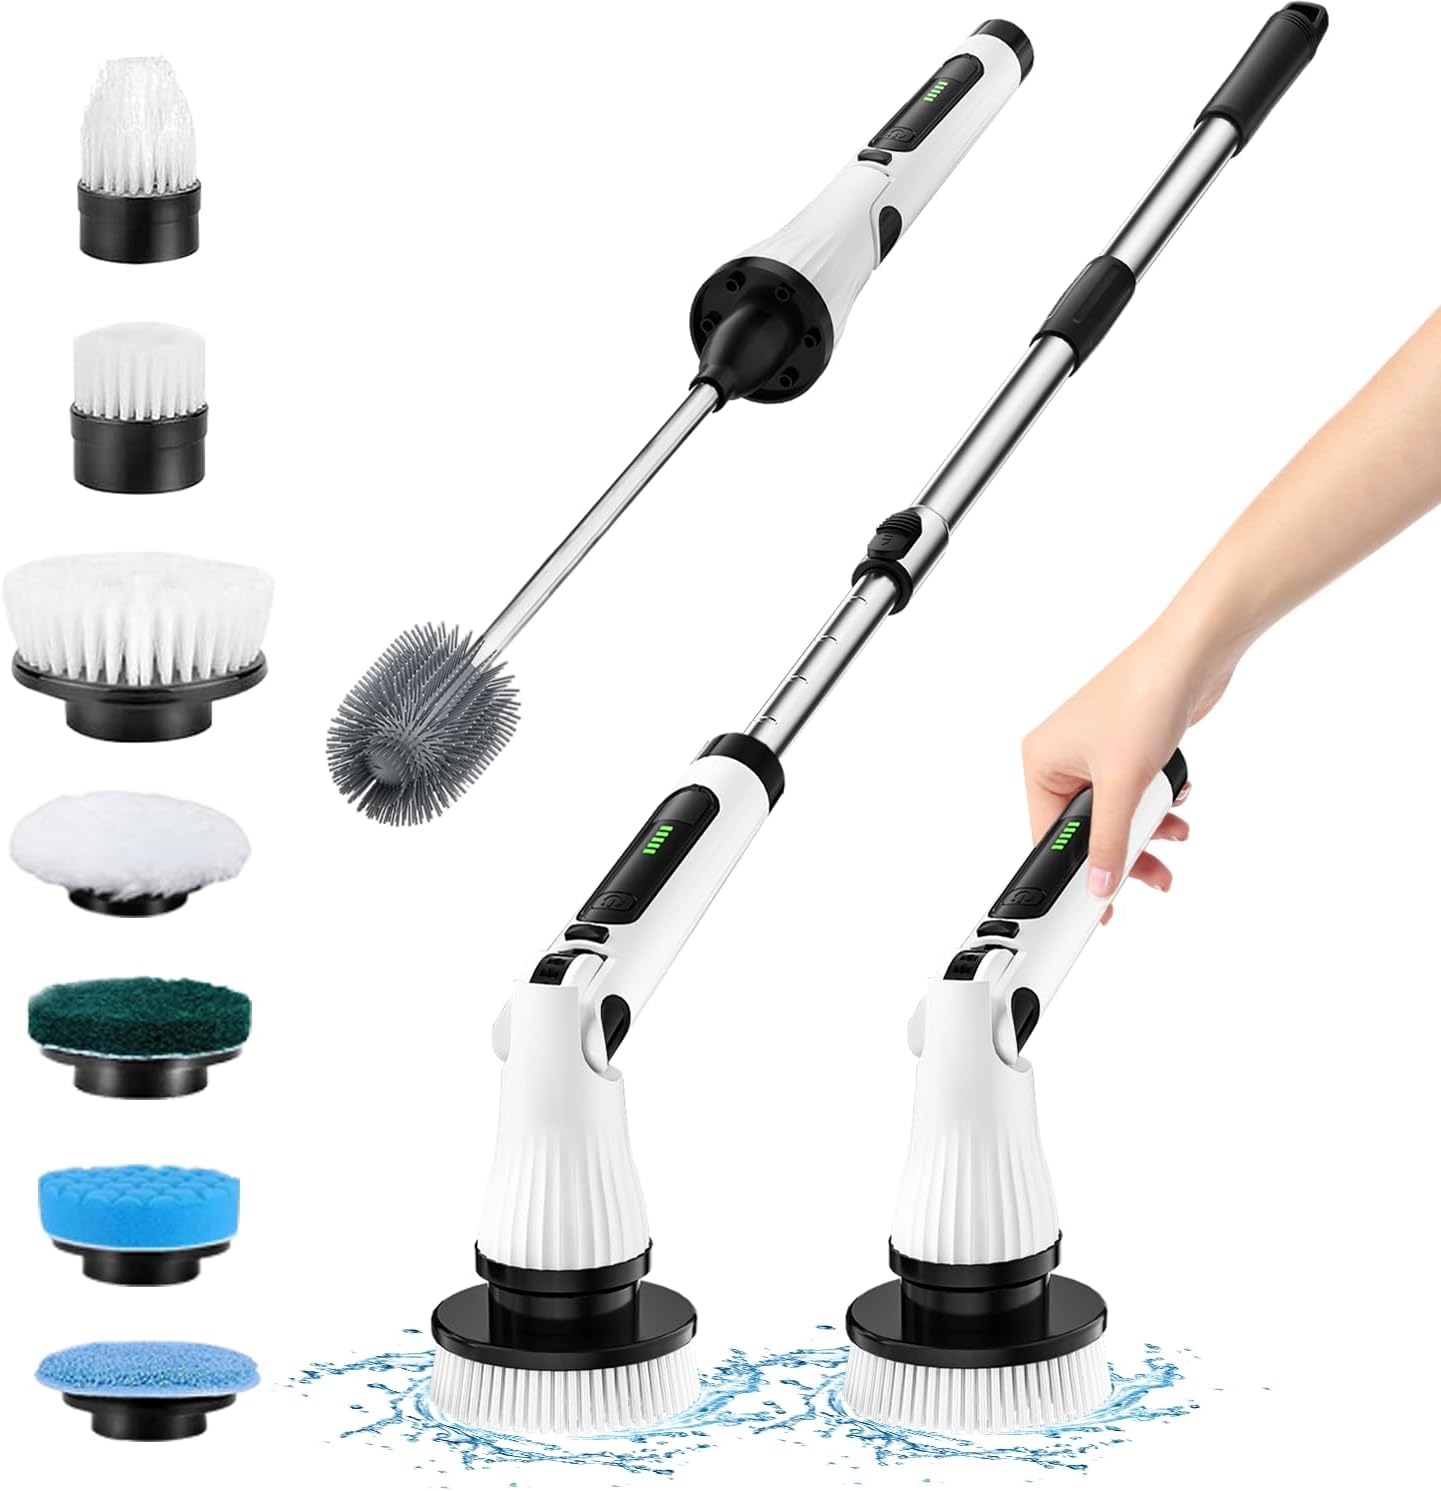 iDOO Electric Spin Scrubber, Shower Scrubber Cleaning Brush with 5 Replaceable Brush Heads, Cordless Power Scrubber with Adjustable Long Handle for